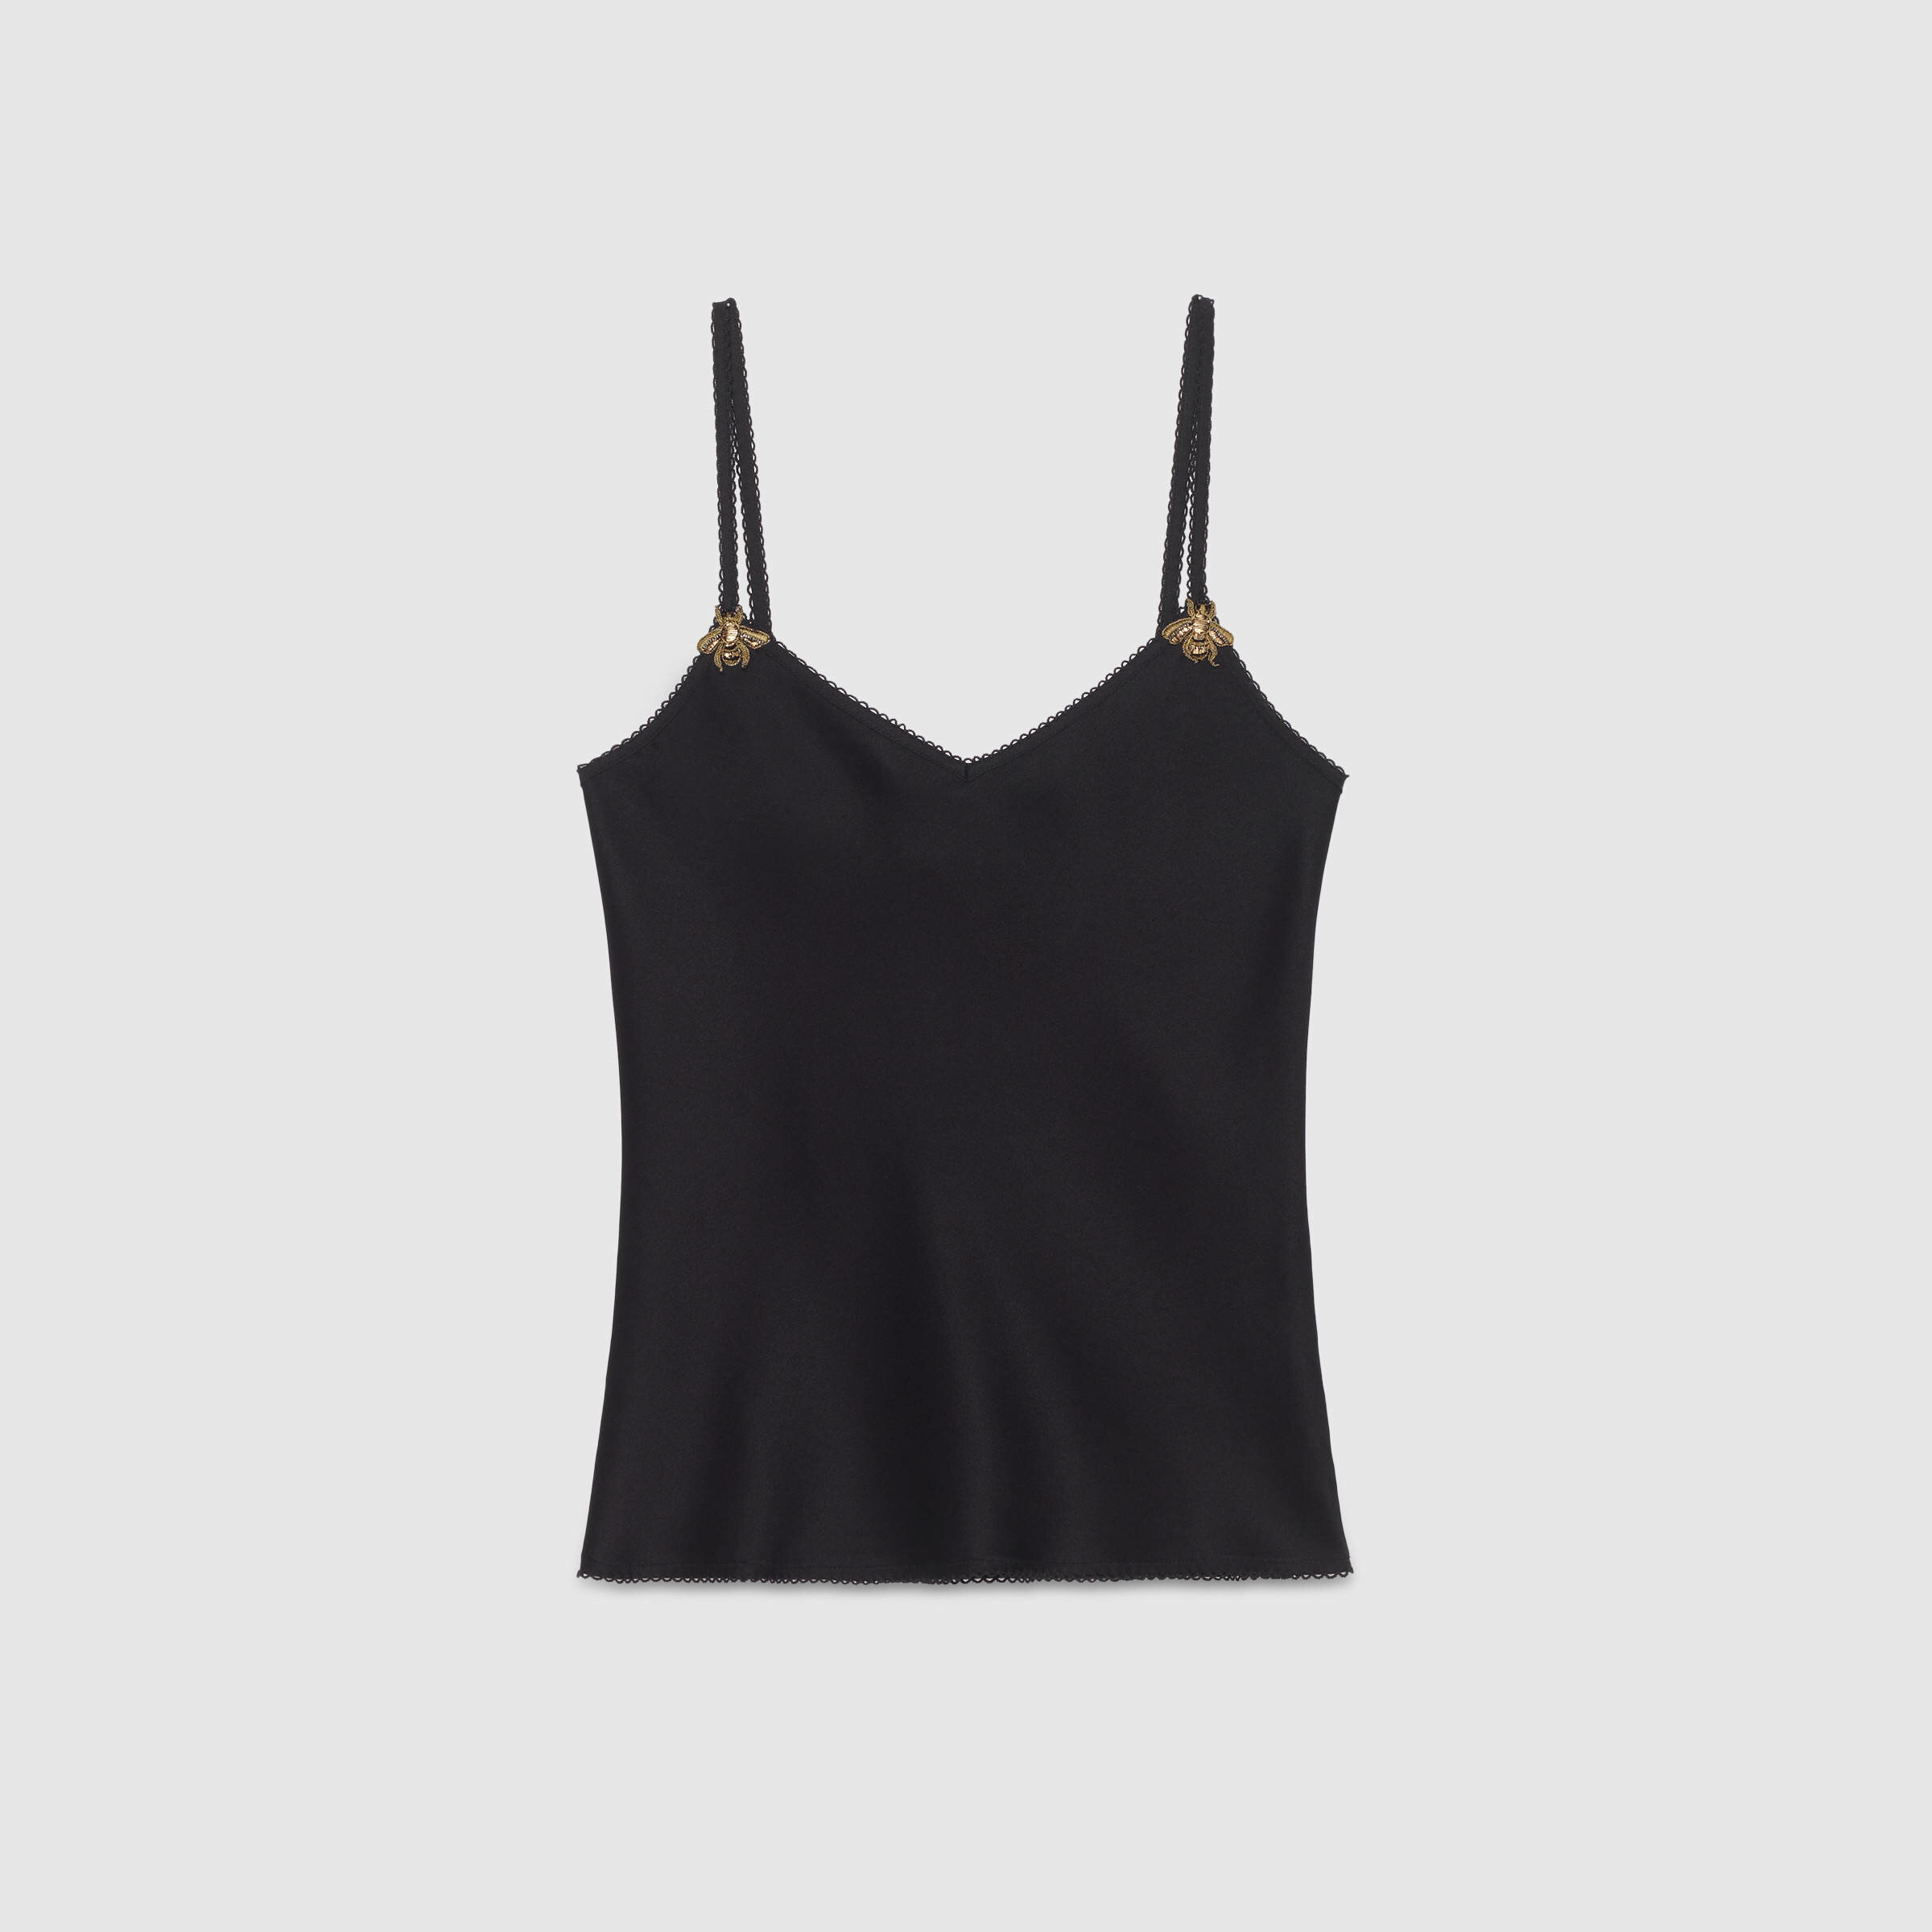 Gucci Satin Embroidered Top in Black.jpg